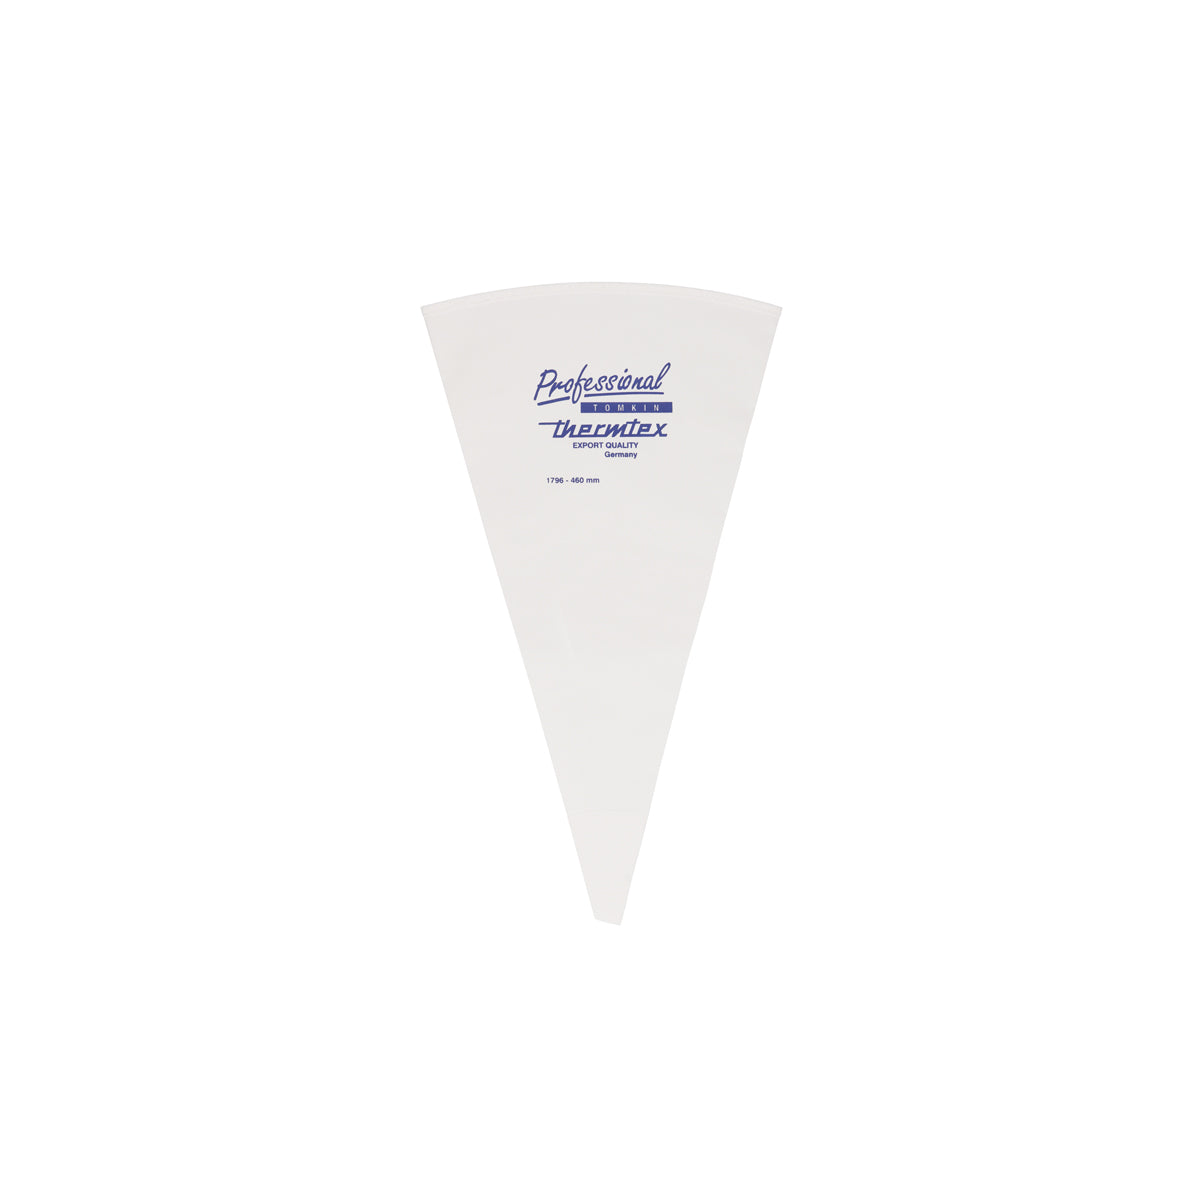 01796 Thermohauser Export Pastry Bag 460mm Tomkin Australia Hospitality Supplies